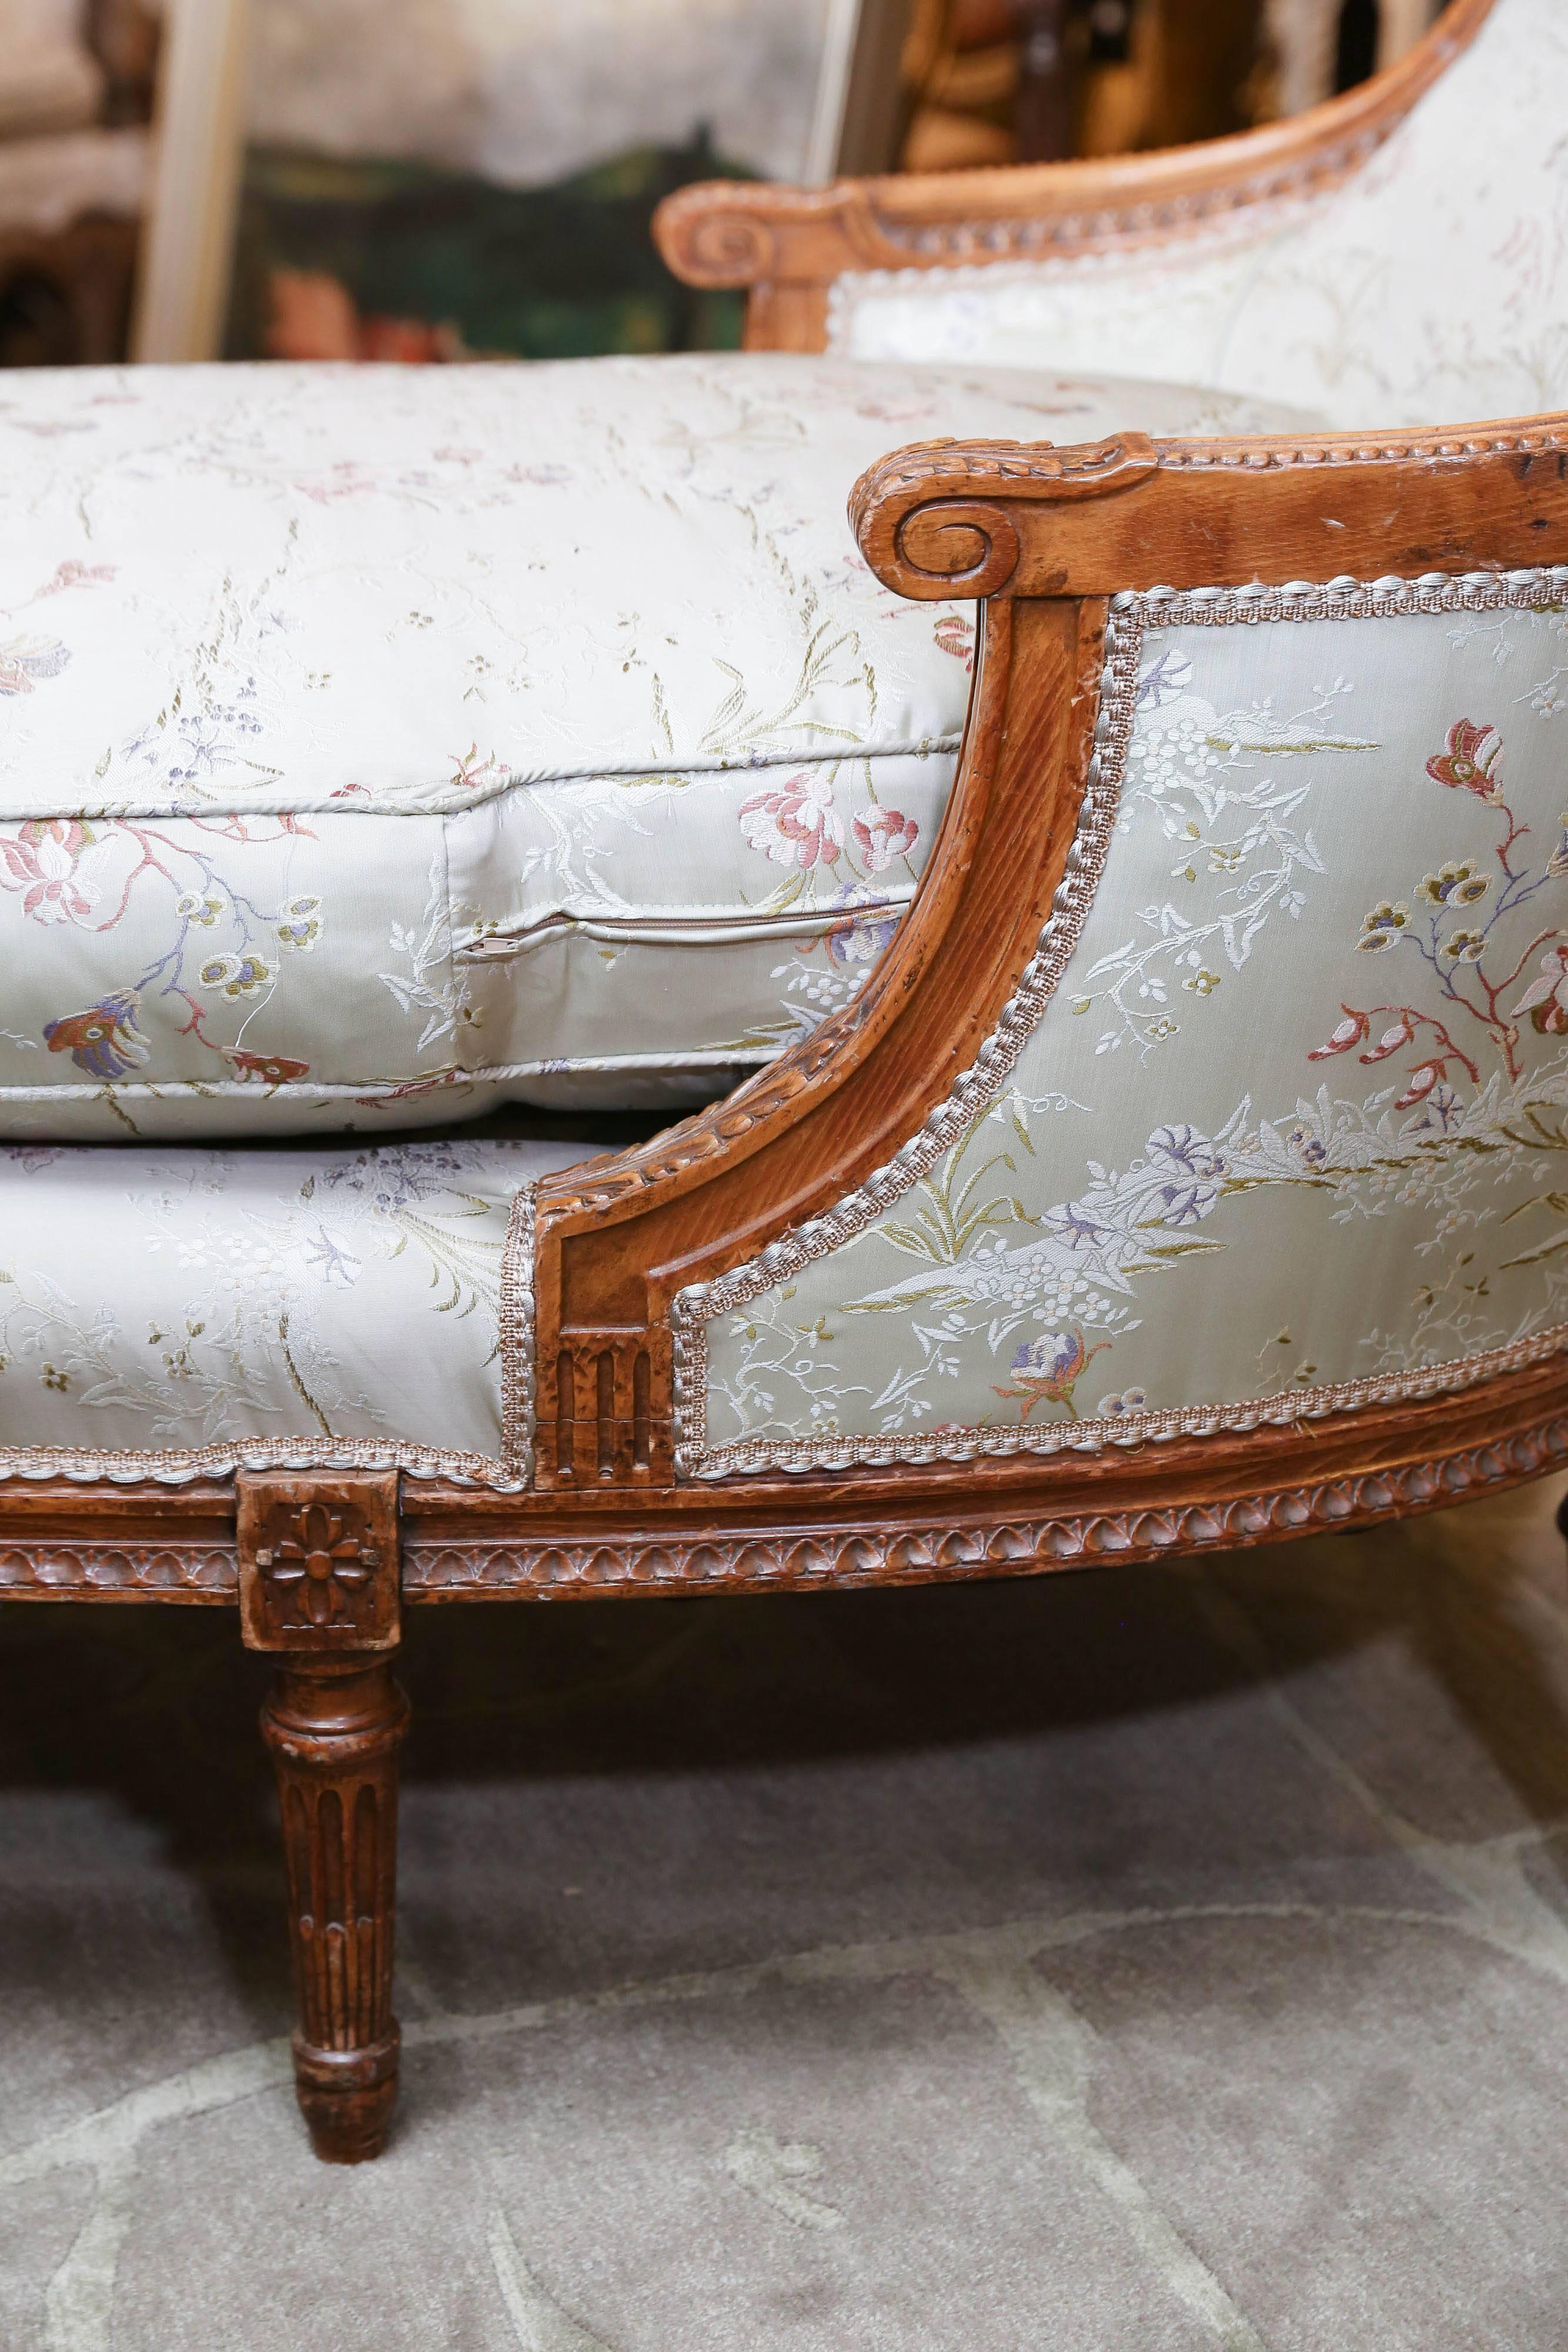 Silk floral designer fabric in a pale sea foam color with
Flowers in a mauve color enhance this great piece.
Reeded legs and a beautifully carved arm and shaped
Back grace this lovely chaise.